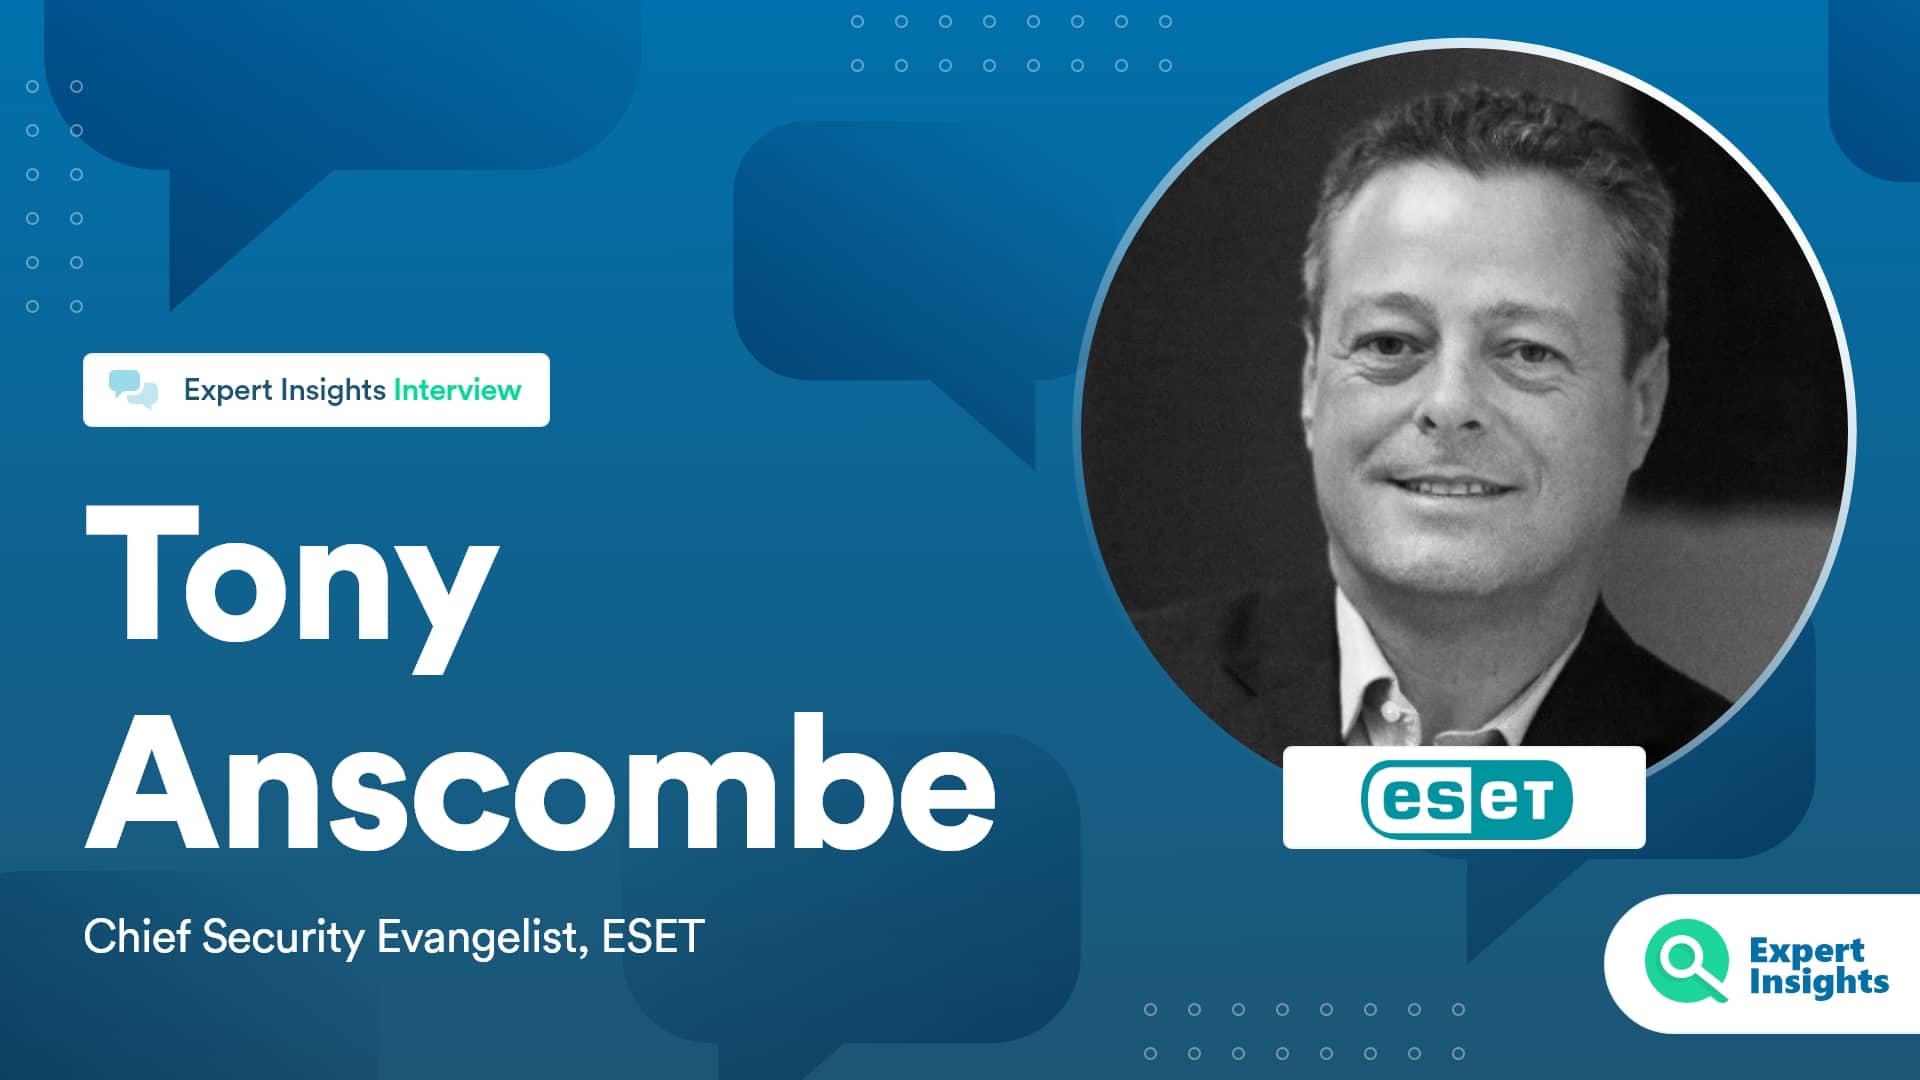 Expert Insights Interview With Tony Anscombe Of ESET